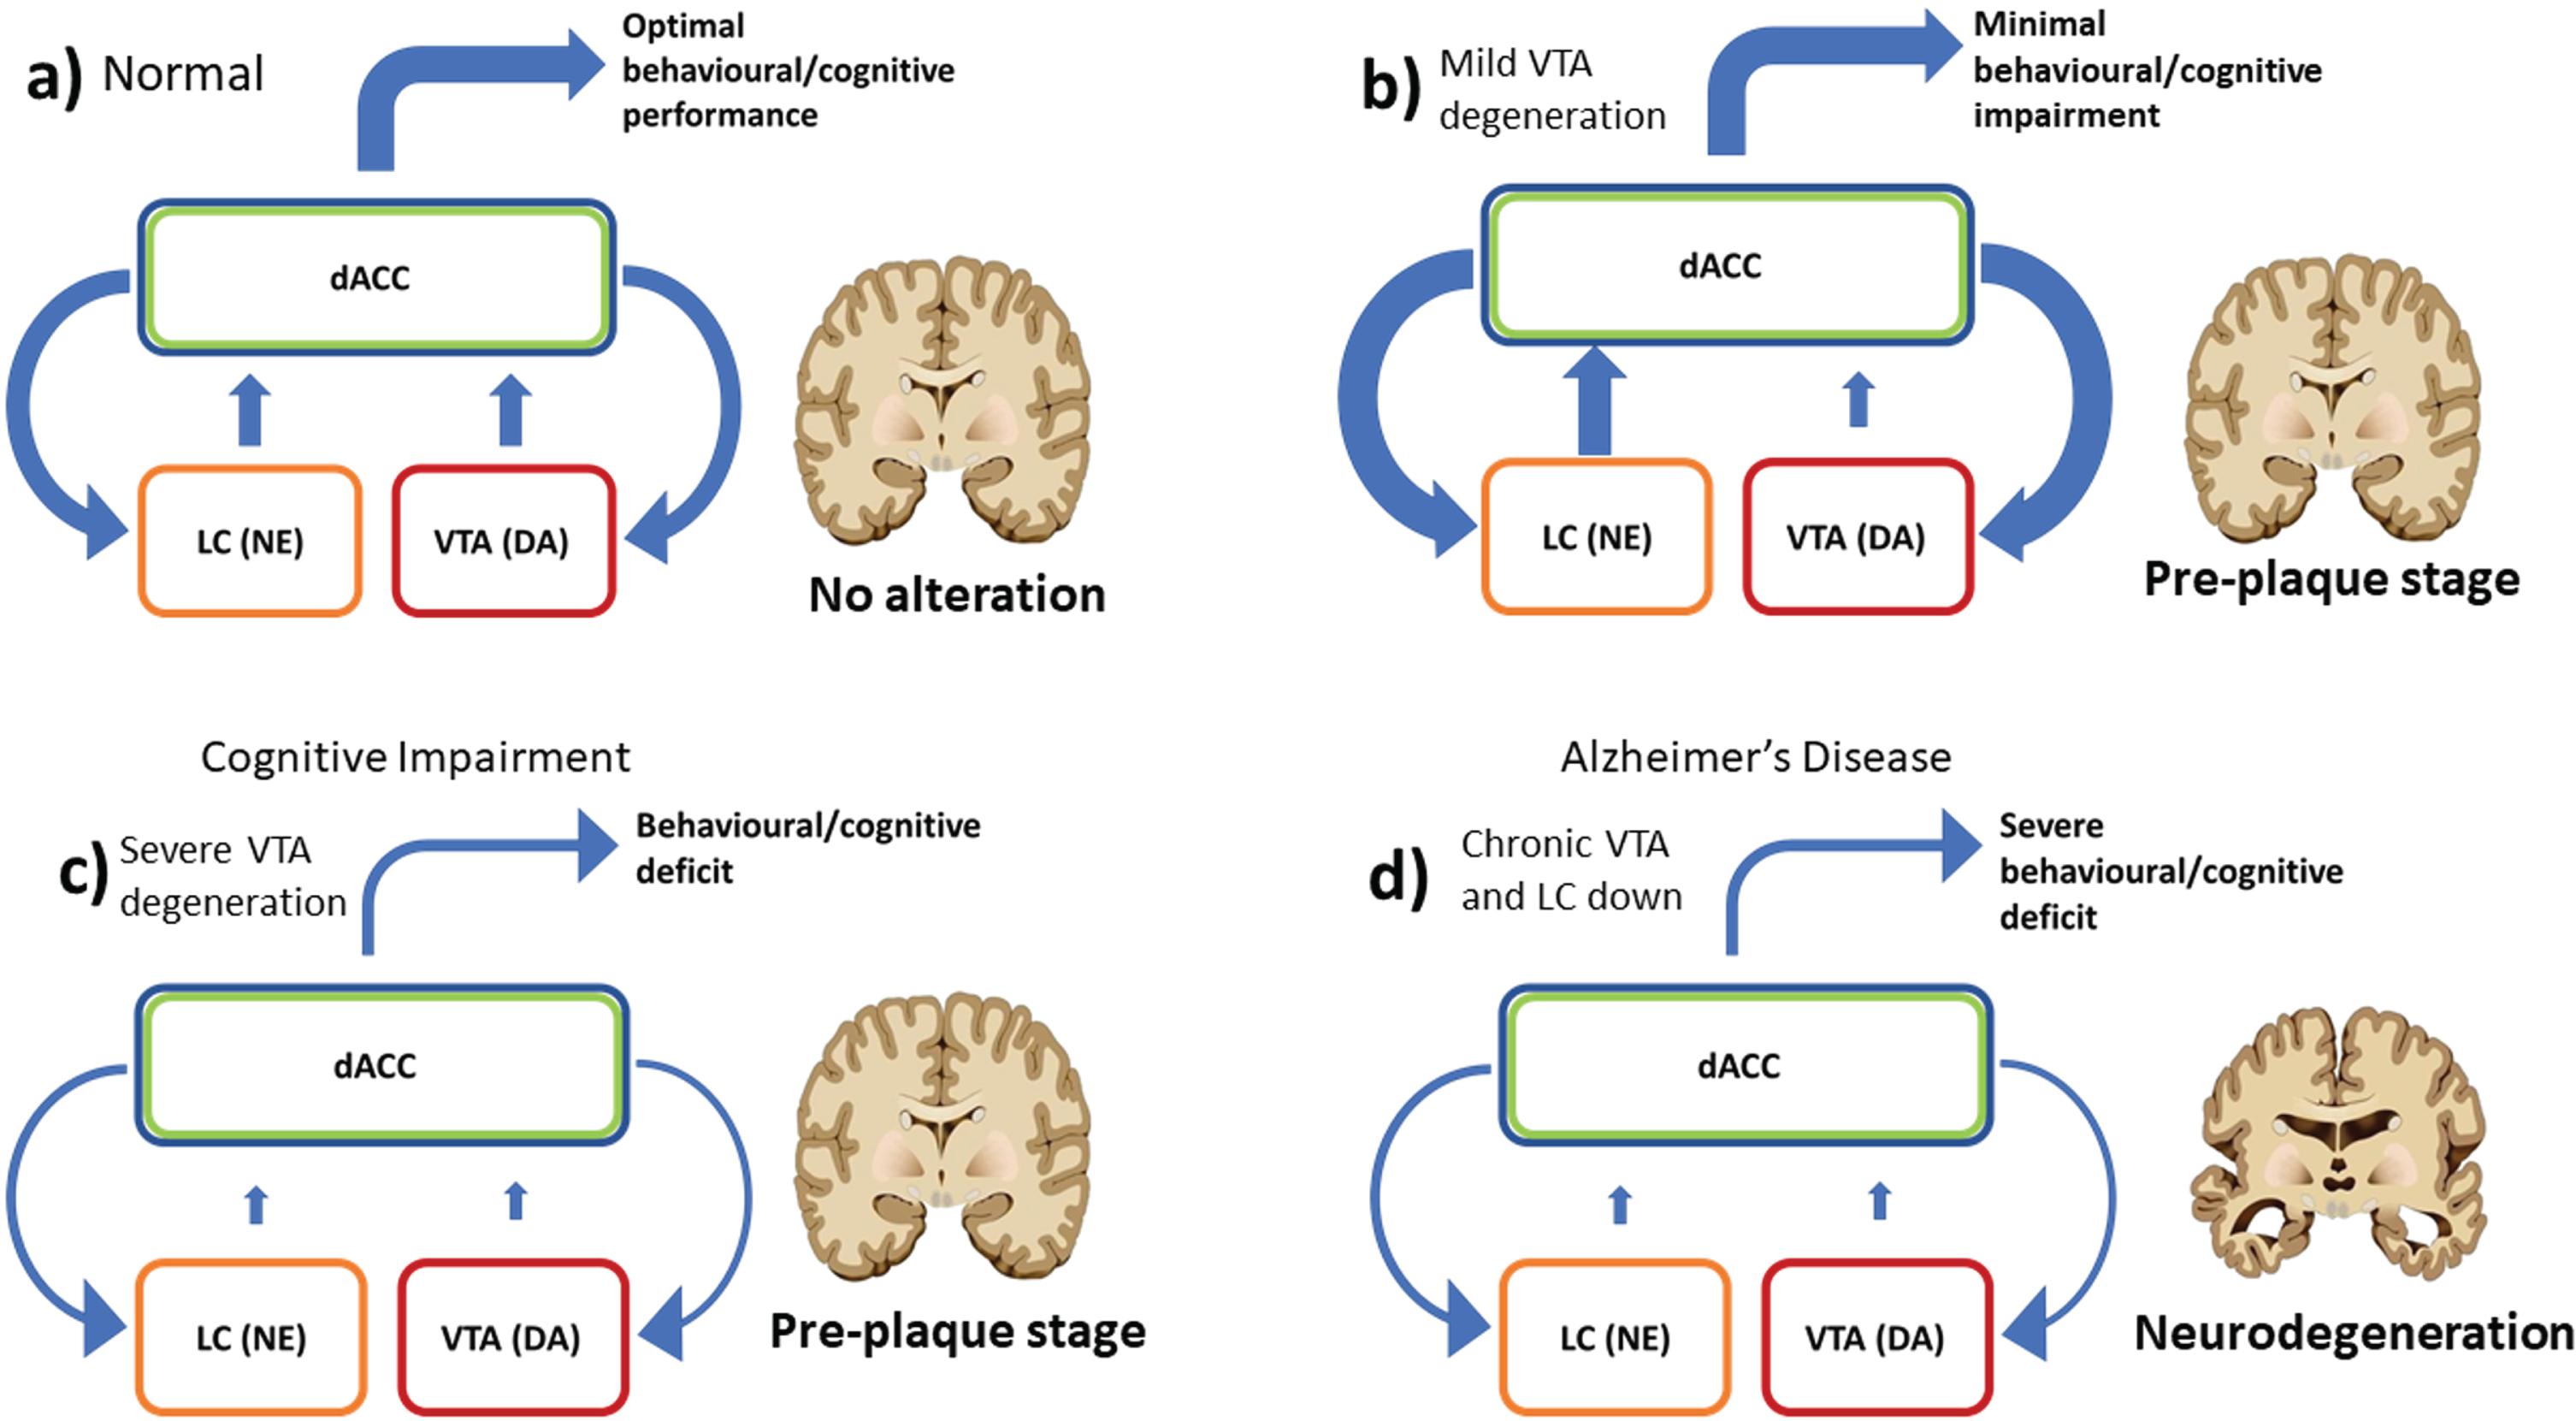 Schema summarizing the interaction between dACC modules and catecholamine modules in the RML, during the progressive degeneration of VTA. Coronal brain sections indicating the possible presence of diffusive degeneration. a) In normal conditions, dACC modules make decisions and optimize catecholamines release to maximize performance (i.e., reward). b) In case of mild VTA degeneration, the dACC can compensate the VTA loss (DA: dopamine), by upregulating the boosting signal (functional reserve, ticker blue downward arrows). This compensates only partially the VTA degeneration (due to neural cells loss), but increases strongly the LC (NE: norepinephrine) output as the LC is not impaired, at least during early stages of the disease. This keeps behavioural performance close to normal, at least for easy tasks, but with a higher recruitment of catecholamines. c) When the VTA degeneration is severe the cost for compensation is too high, and therefore the dACC decreases the boosting signal (thinner downward arrows), causing a downregulation of both LC and an even stronger VTA output decrease. This causes the behavioural deficits described in Figs. 2 and 3, including the WM impairment due to the loss of LC function. d) Chronic catecholamines down-regulation leads to severe cognitive impairments and possibly to a lower clearance of Aβ peptide in LC target areas, thus contributing to the disease progression toward the plaque stage.